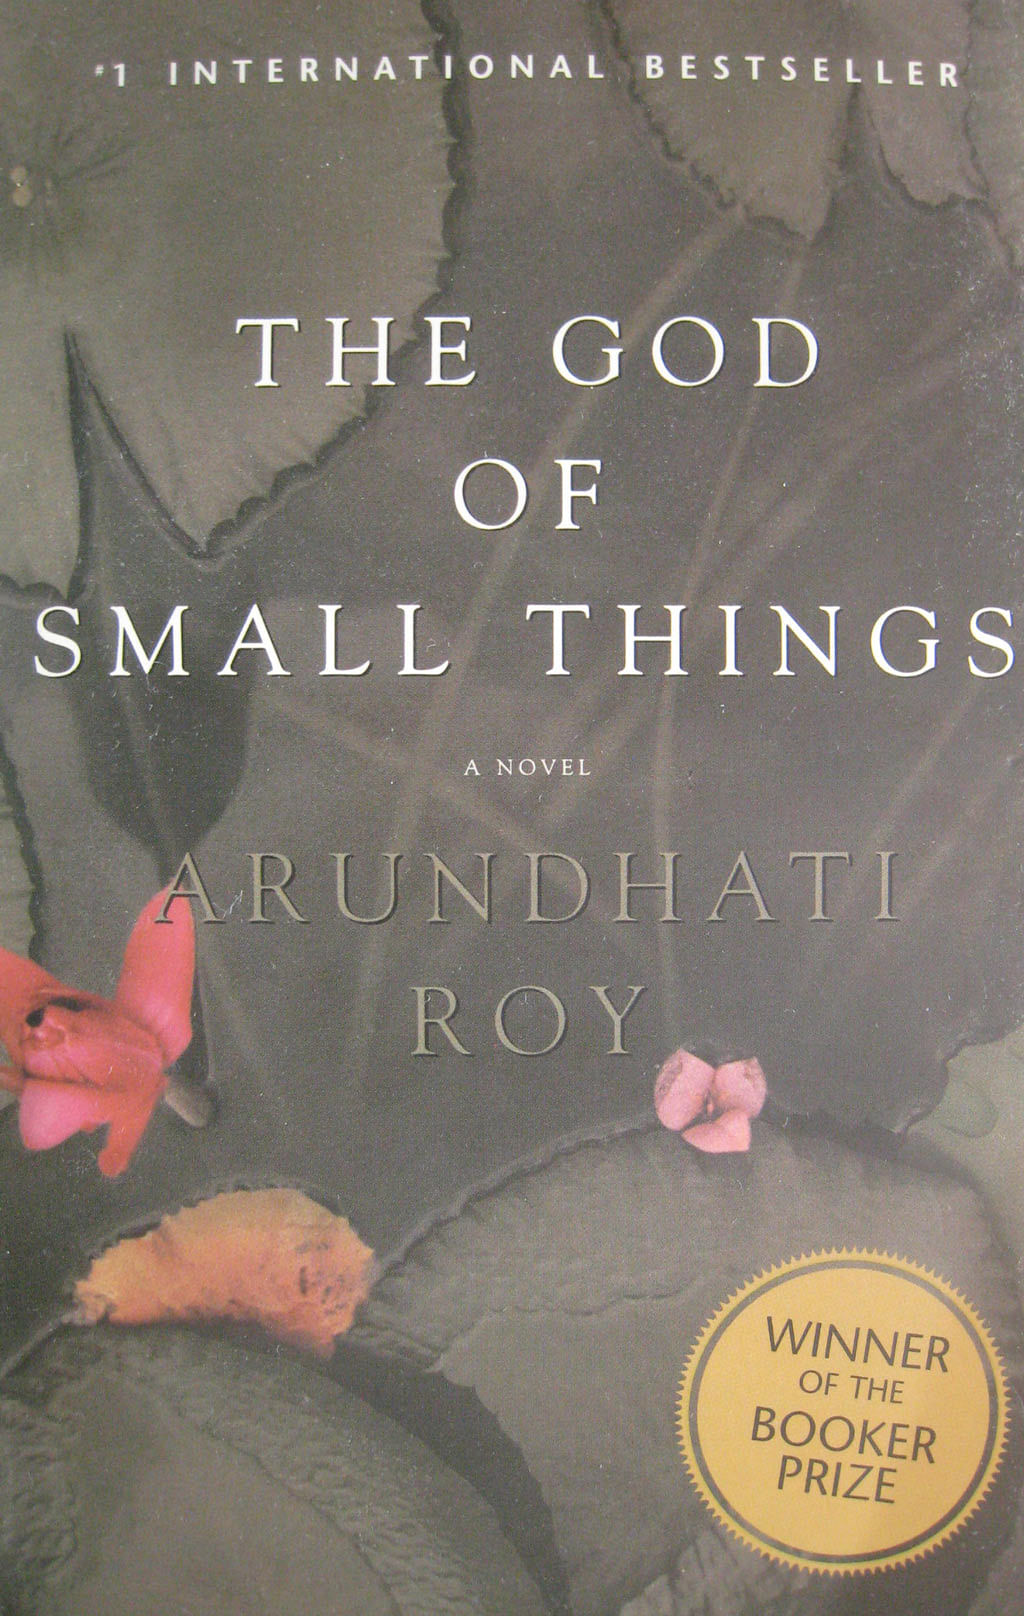 On her birthday, an appeal to Arundhati Roy to give us some more of her delectable fiction.